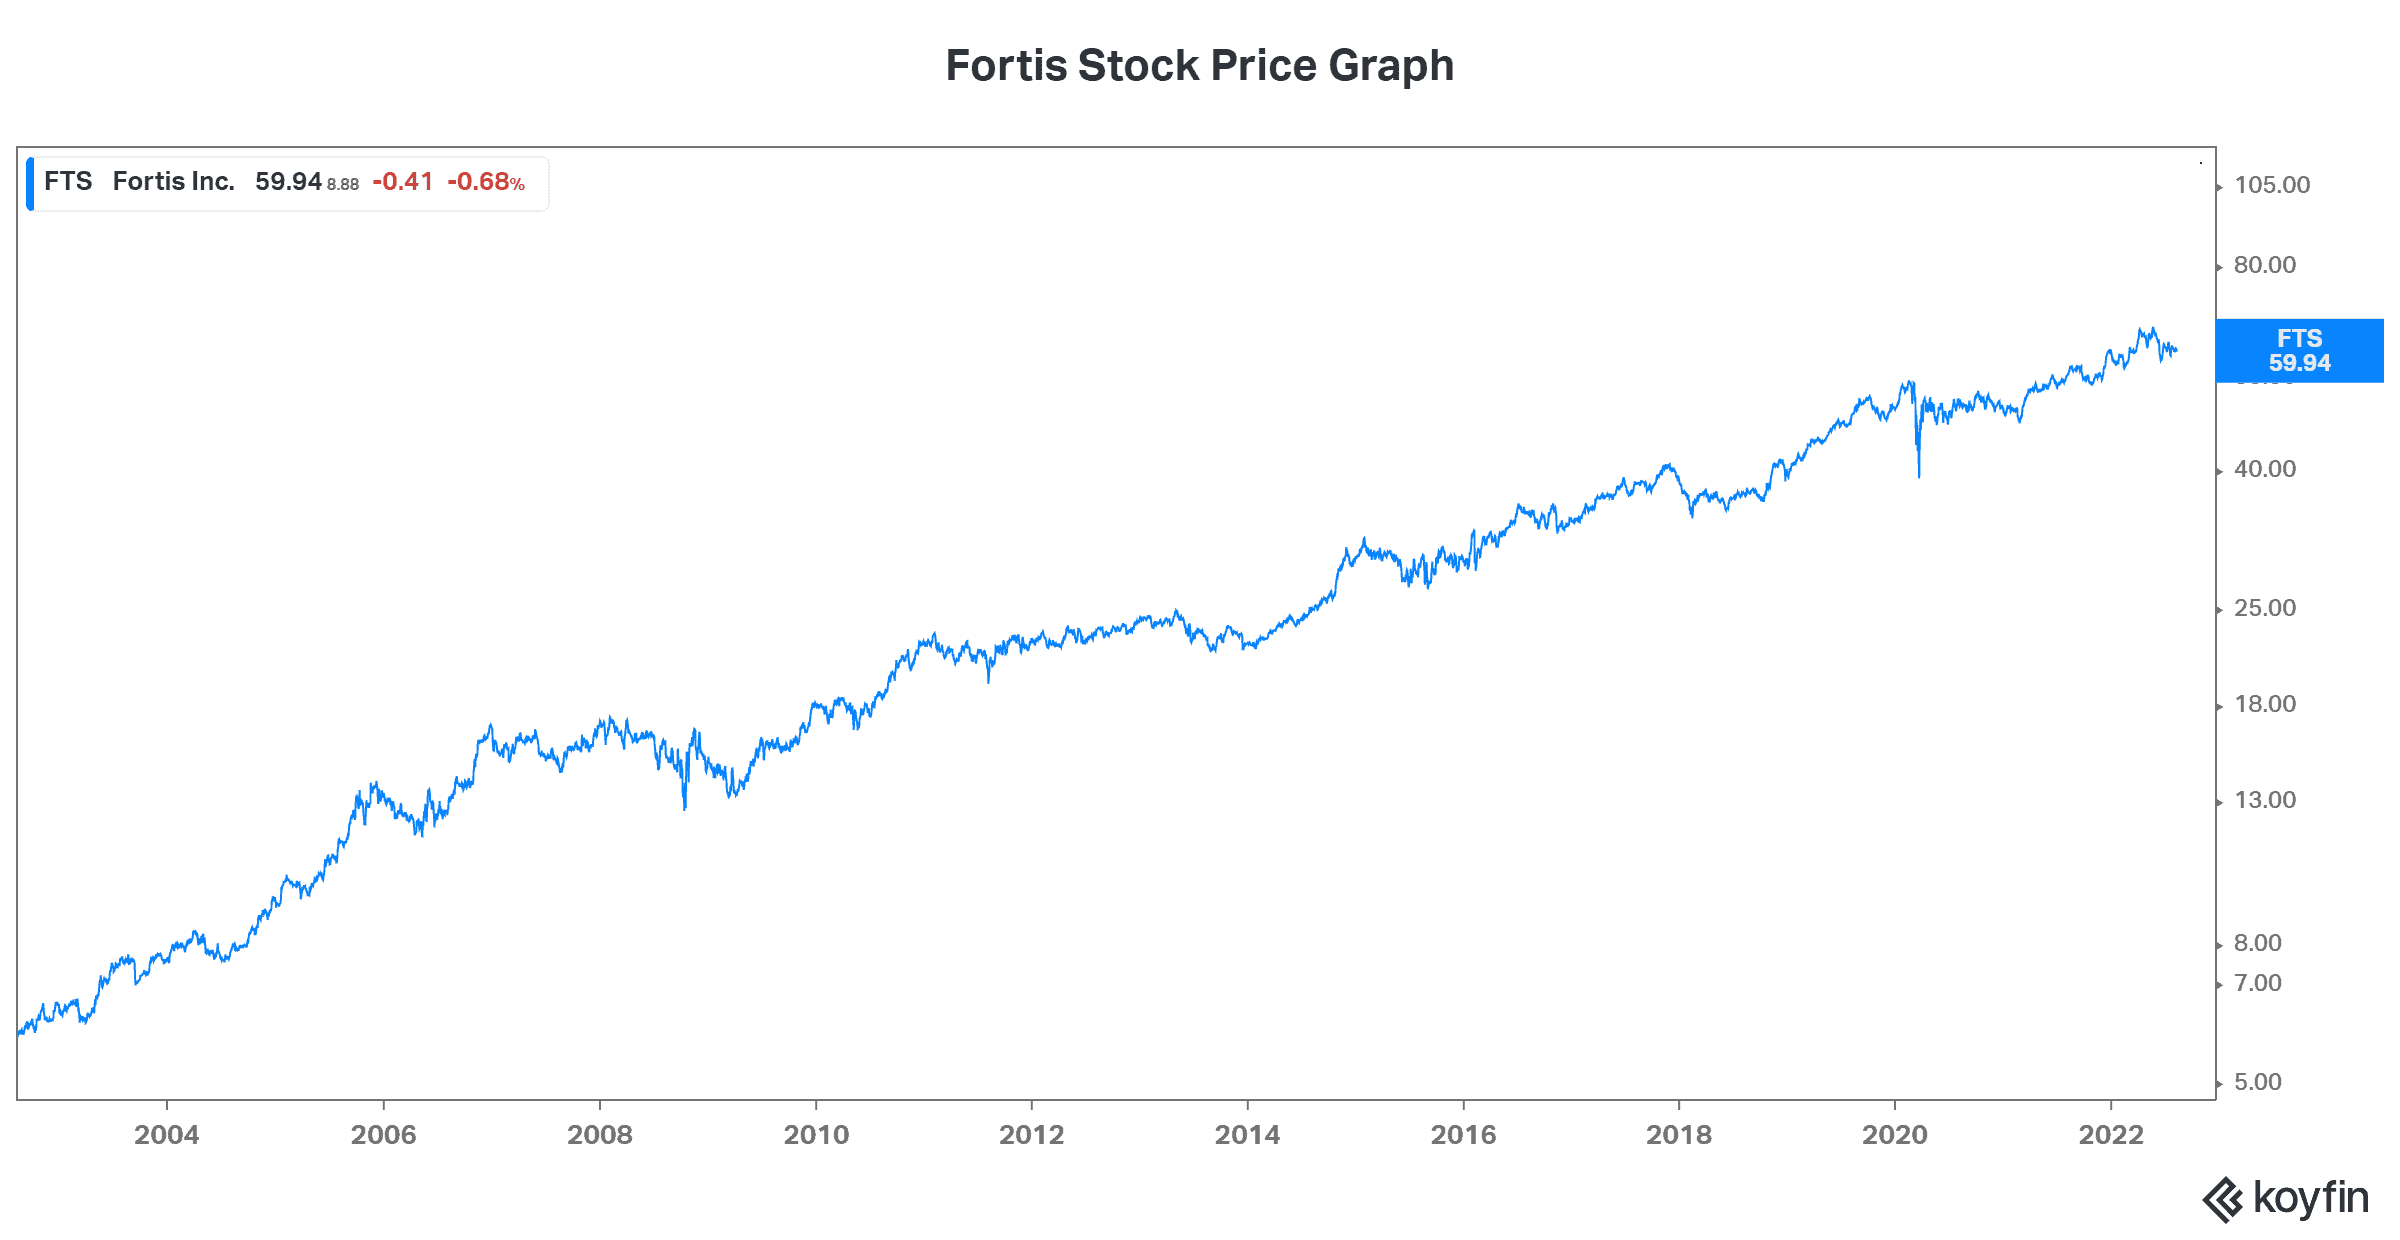 Fortis stock resilient